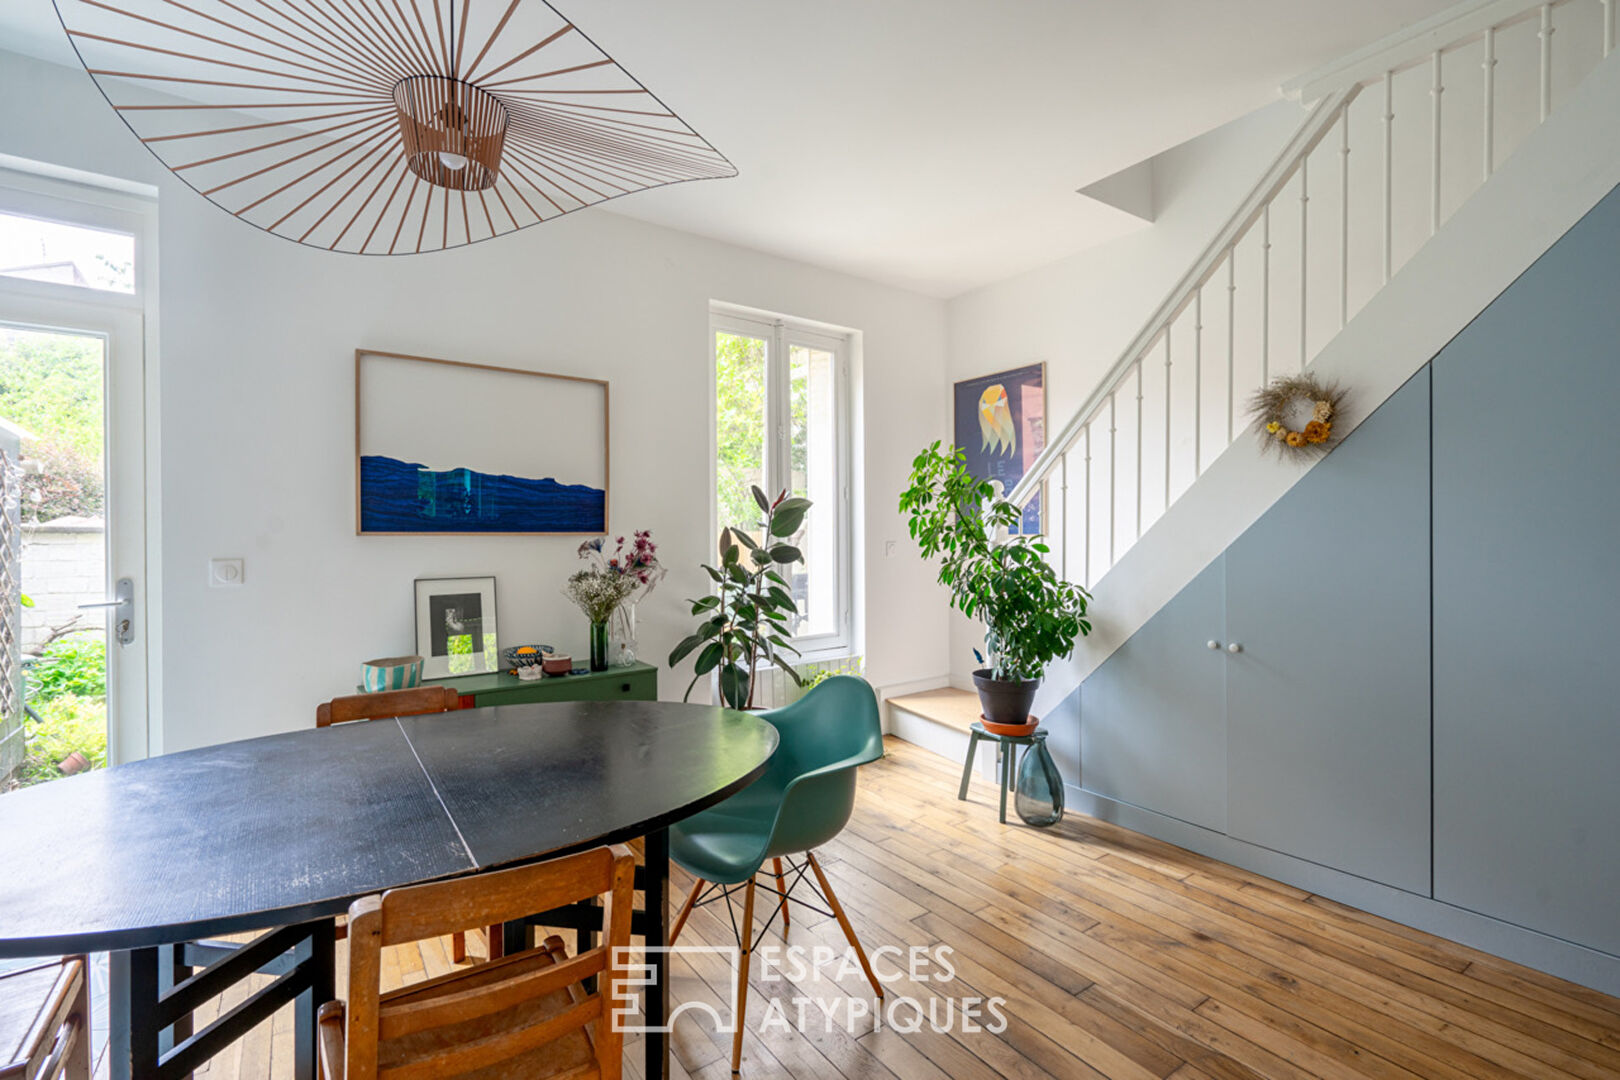 Duplex renovated by Architect with Garden